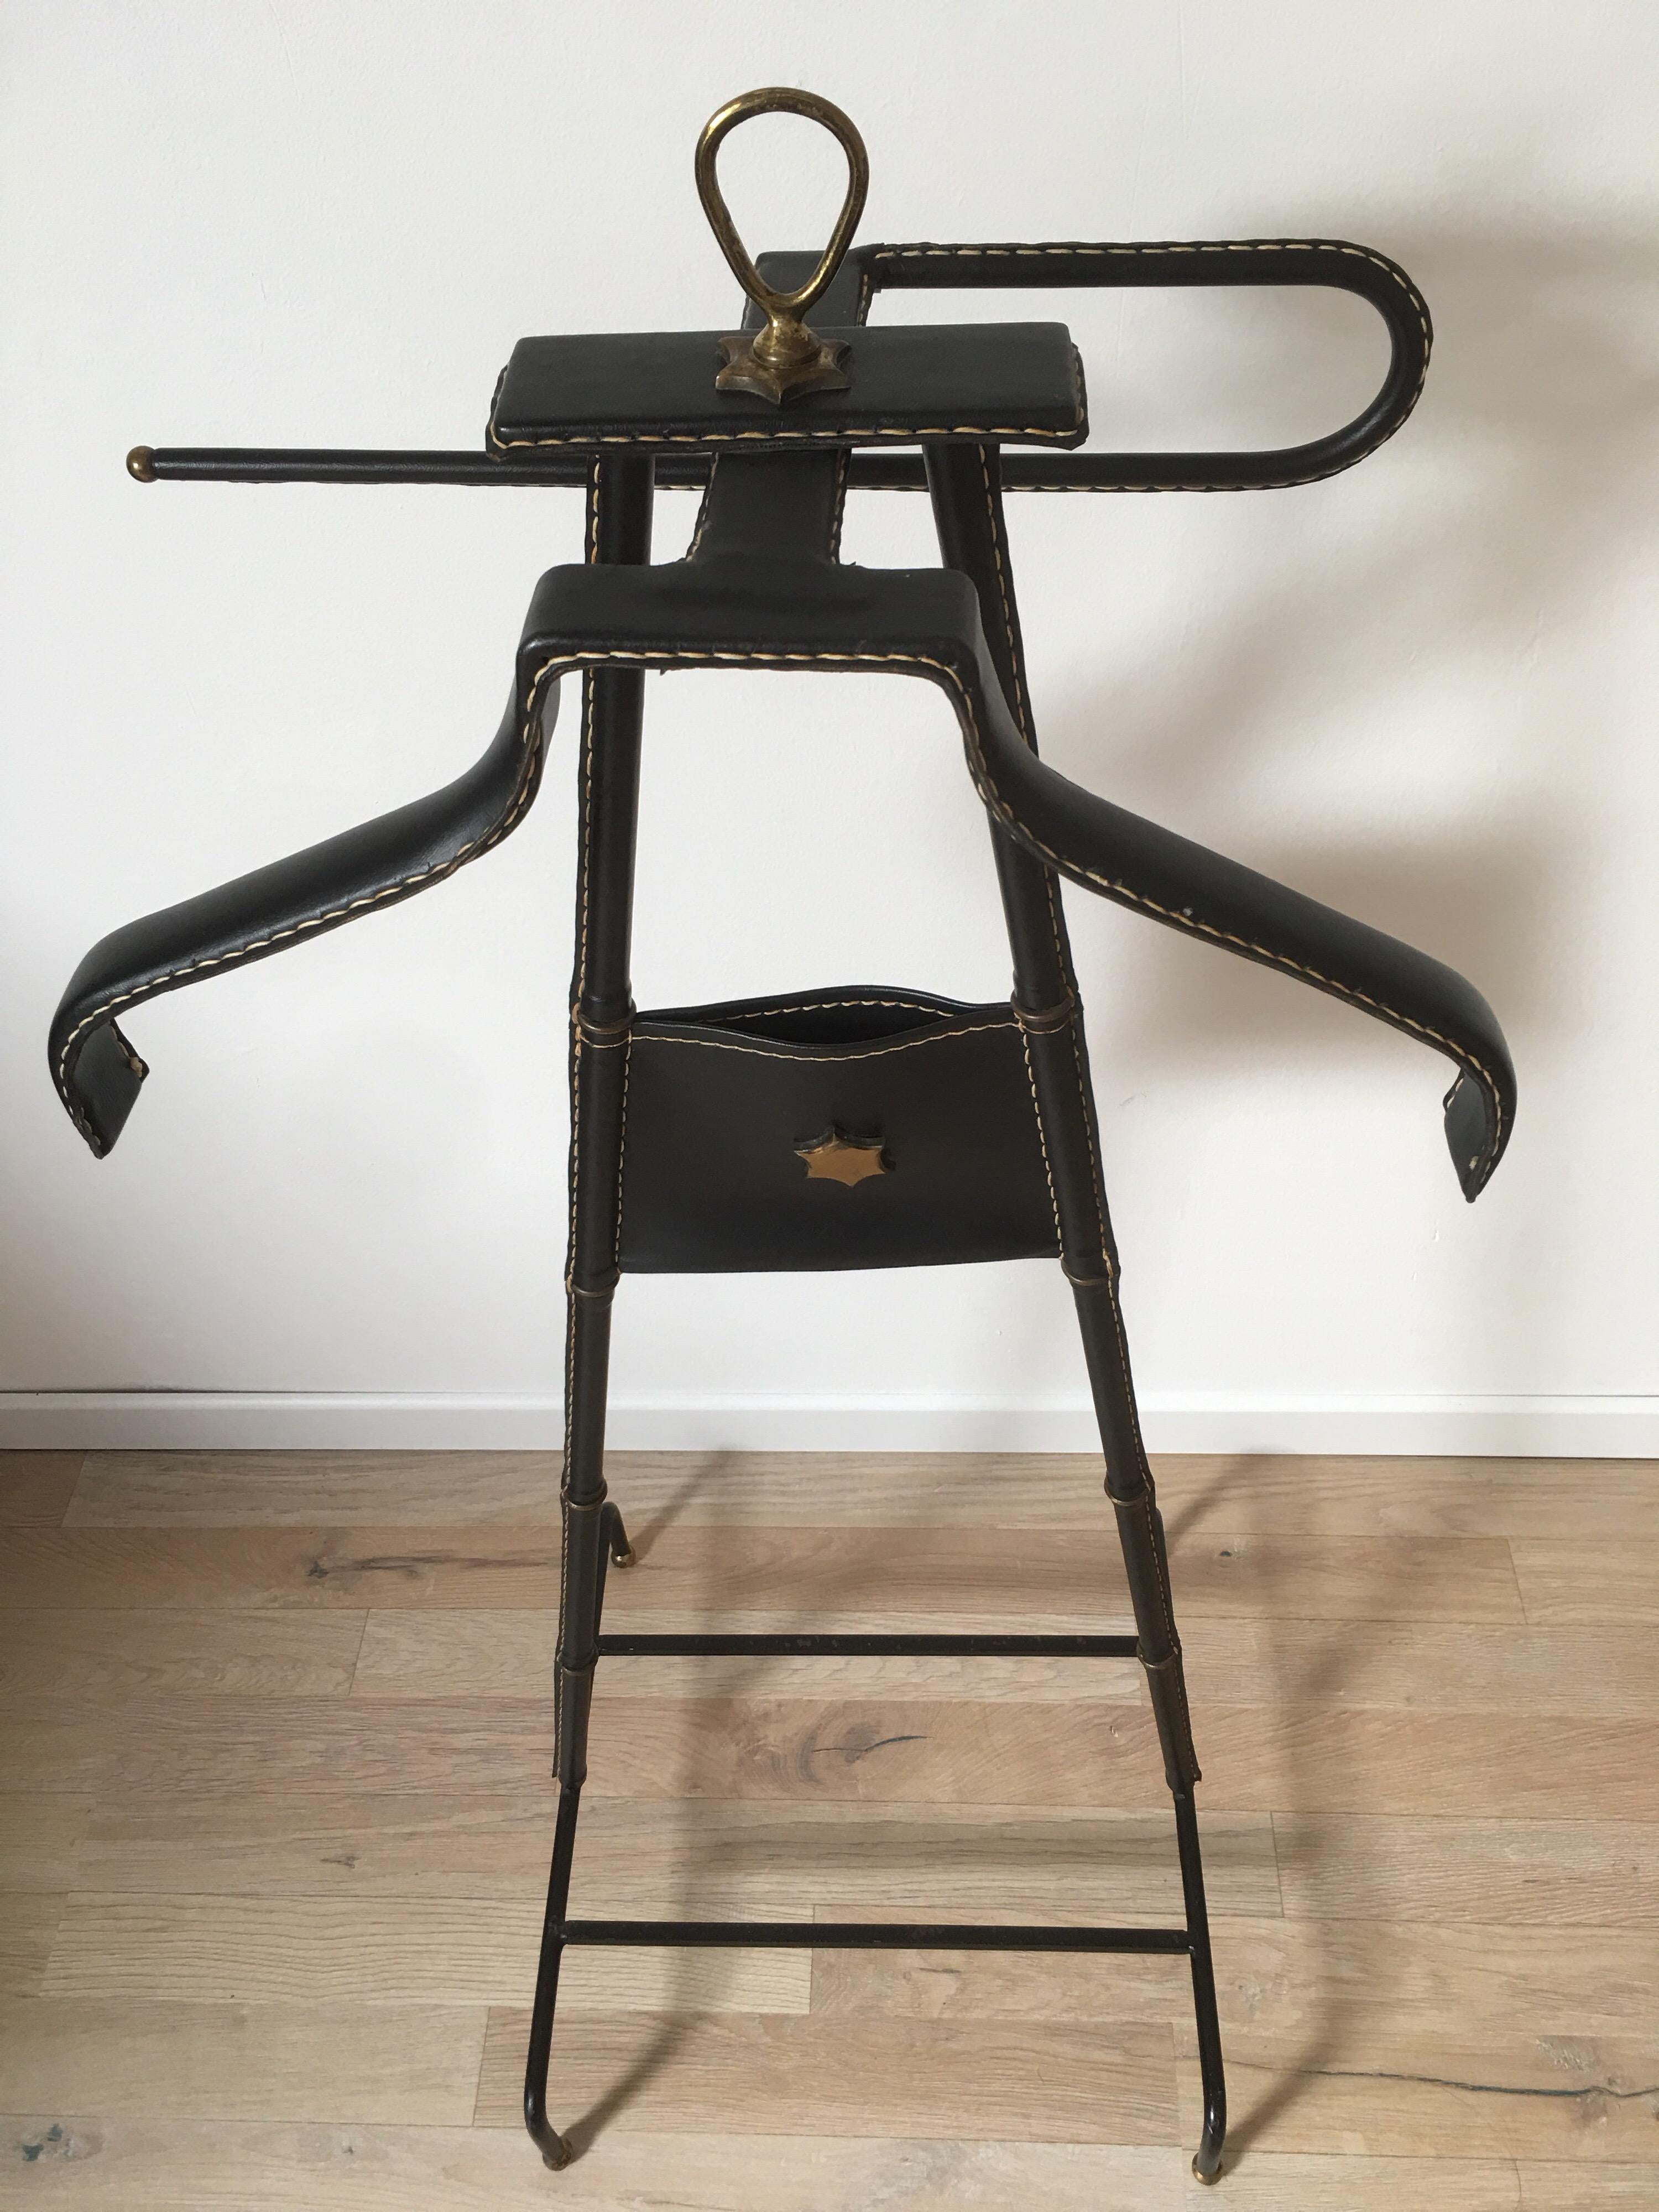 Beautiful black stitched leather valet designed by Jacques Adnet in France in 1950s.
This rare model of valet de nuit, fully leather-wrapped, has 2 arms to wear shirts and pants. It rests on a bamboo-shaped base, brass rings and saddle-stitched